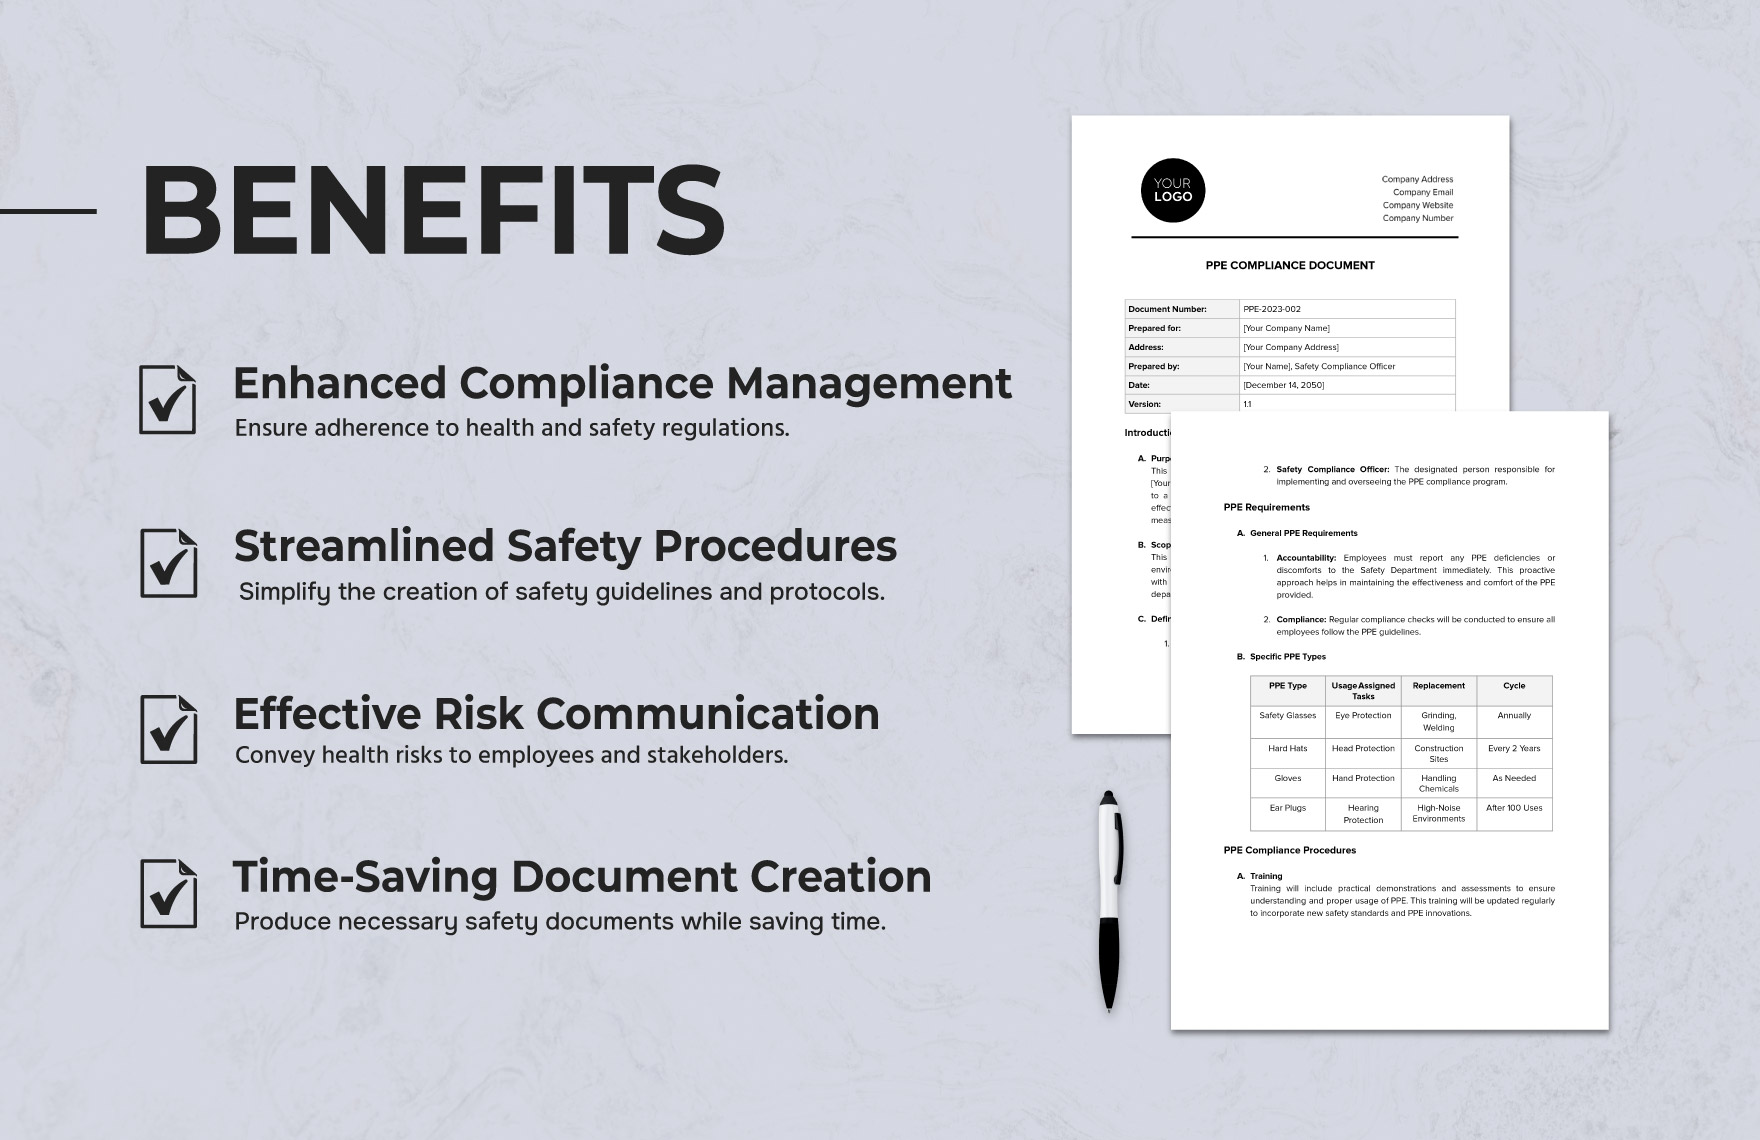 PPE Compliance Document Template